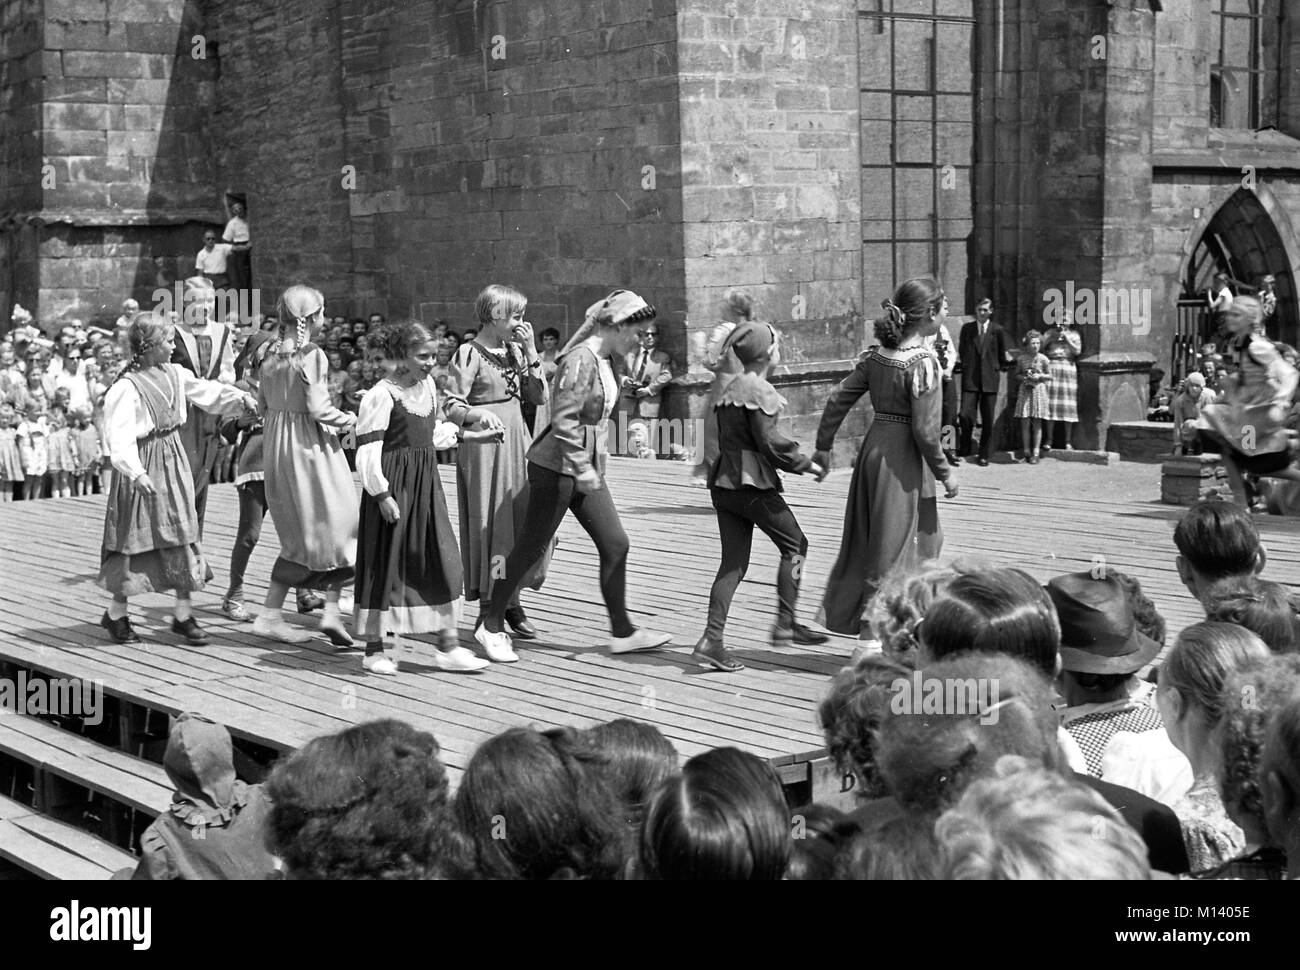 Pied Piper of Hamelin Ceremony in Hamelin, Germany about 1955  image 3/36  The townsfolk of Hamelin Stock Photo